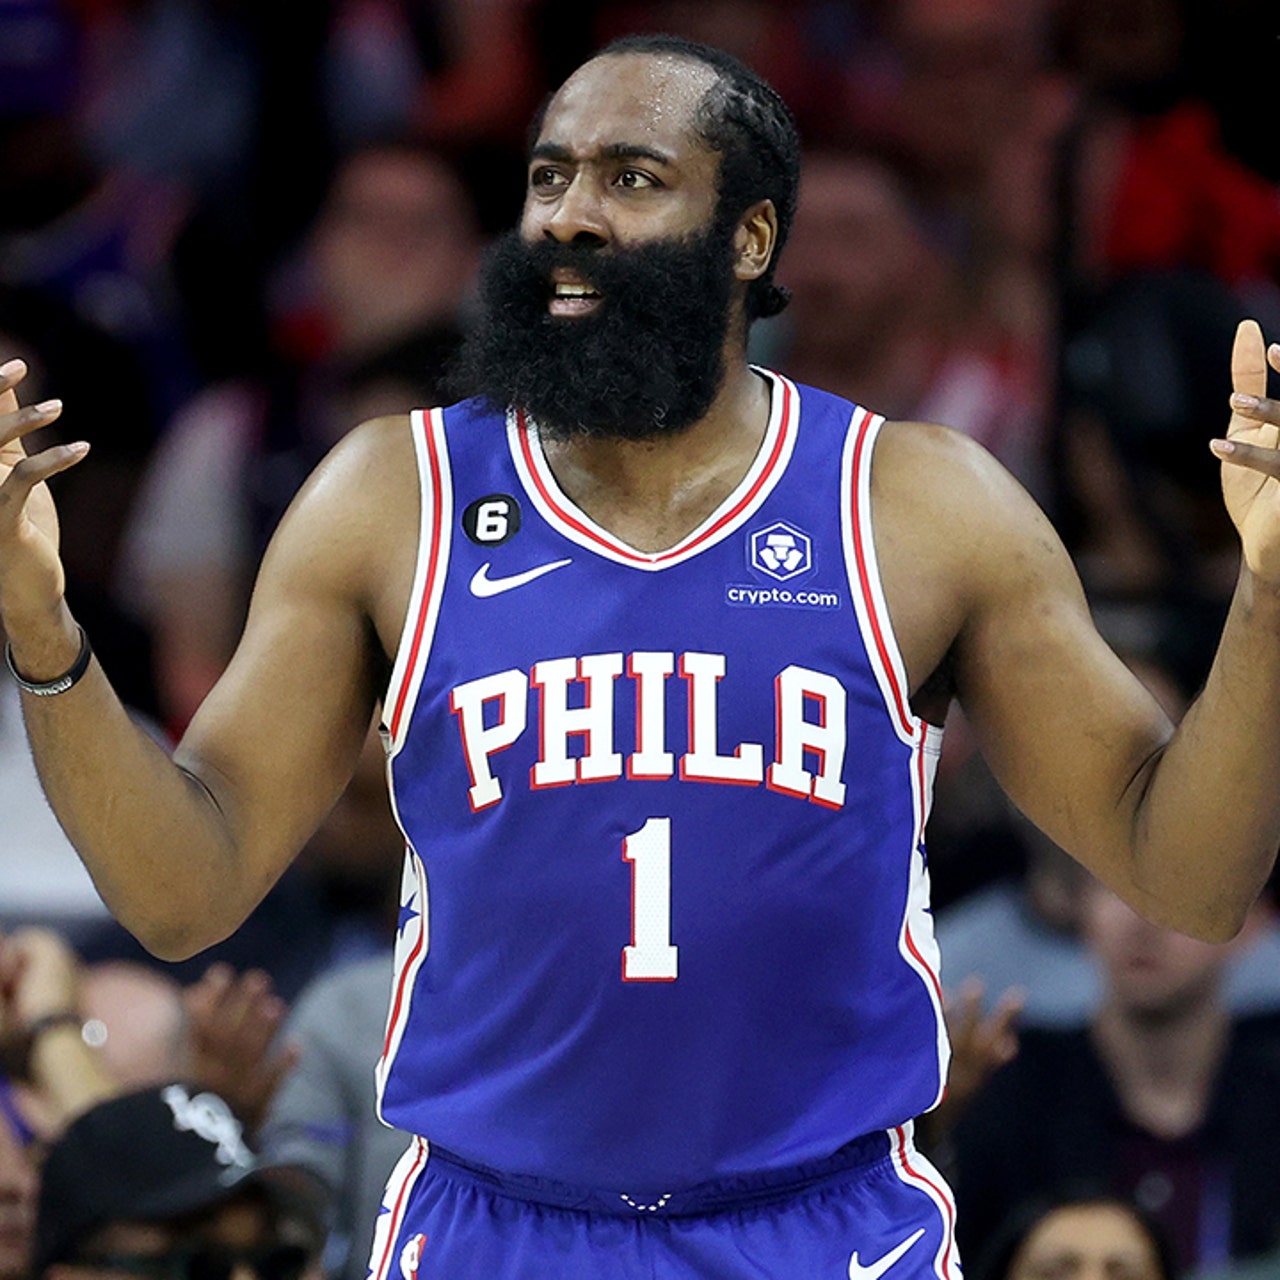 James Harden talks Harden Vol. 7, hints at leaving 76ers? - Basketball  Network - Your daily dose of basketball